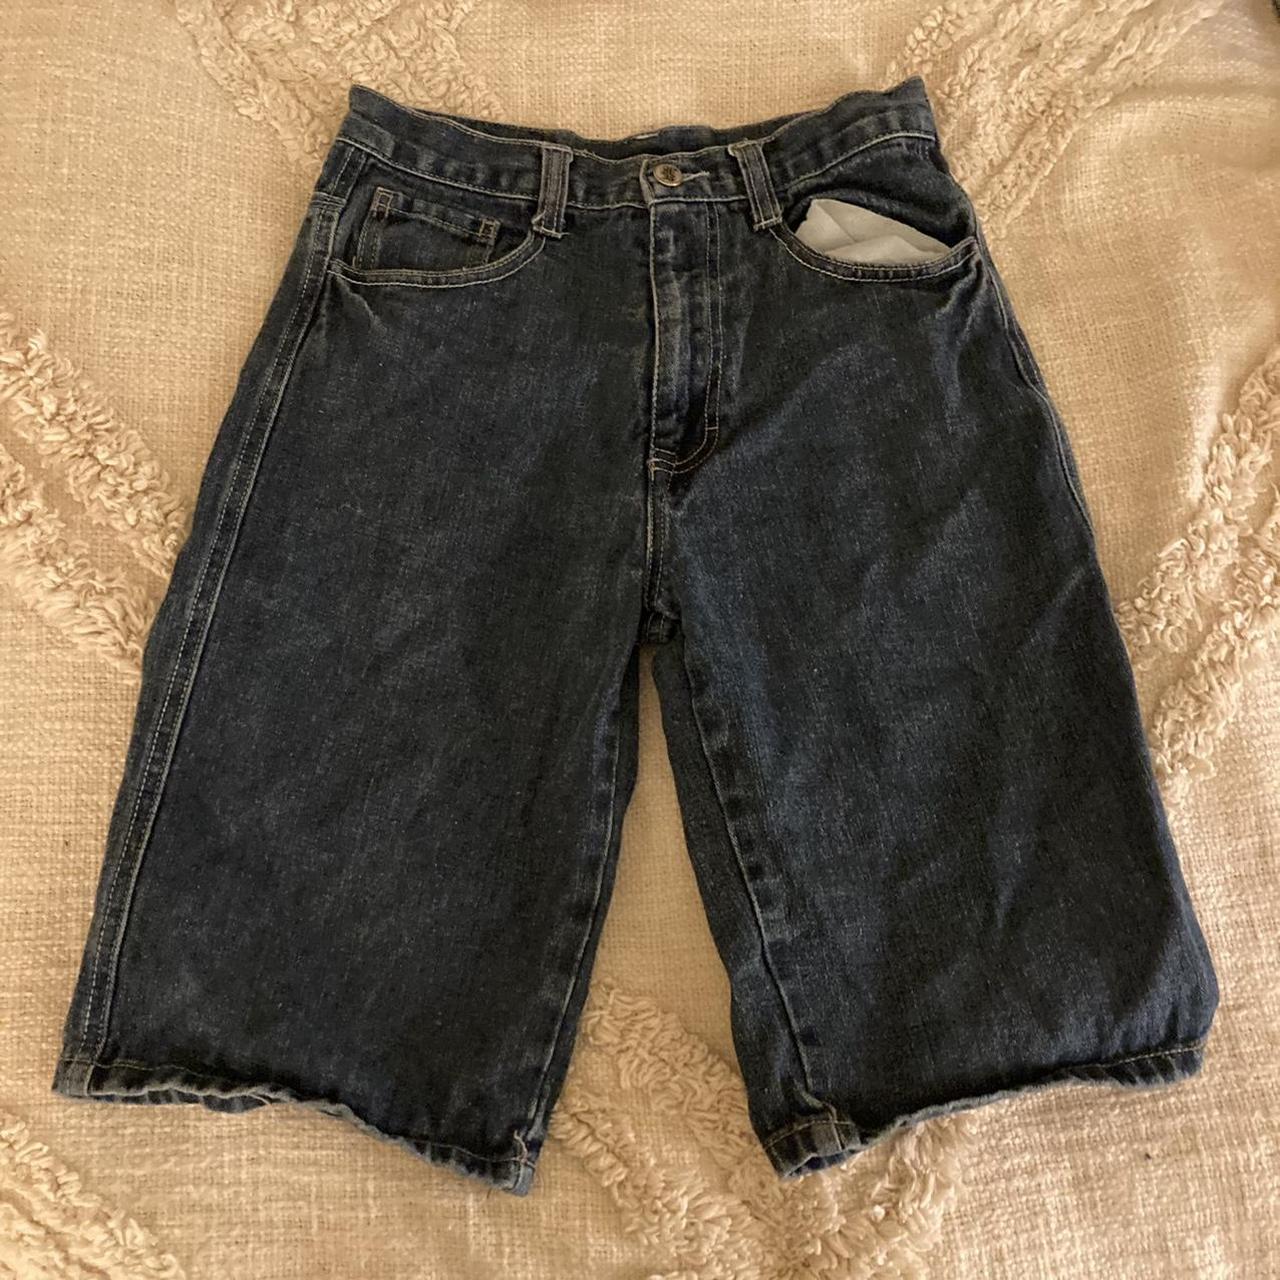 Y2k jorts featuring back pocket embroidery, marked a... - Depop